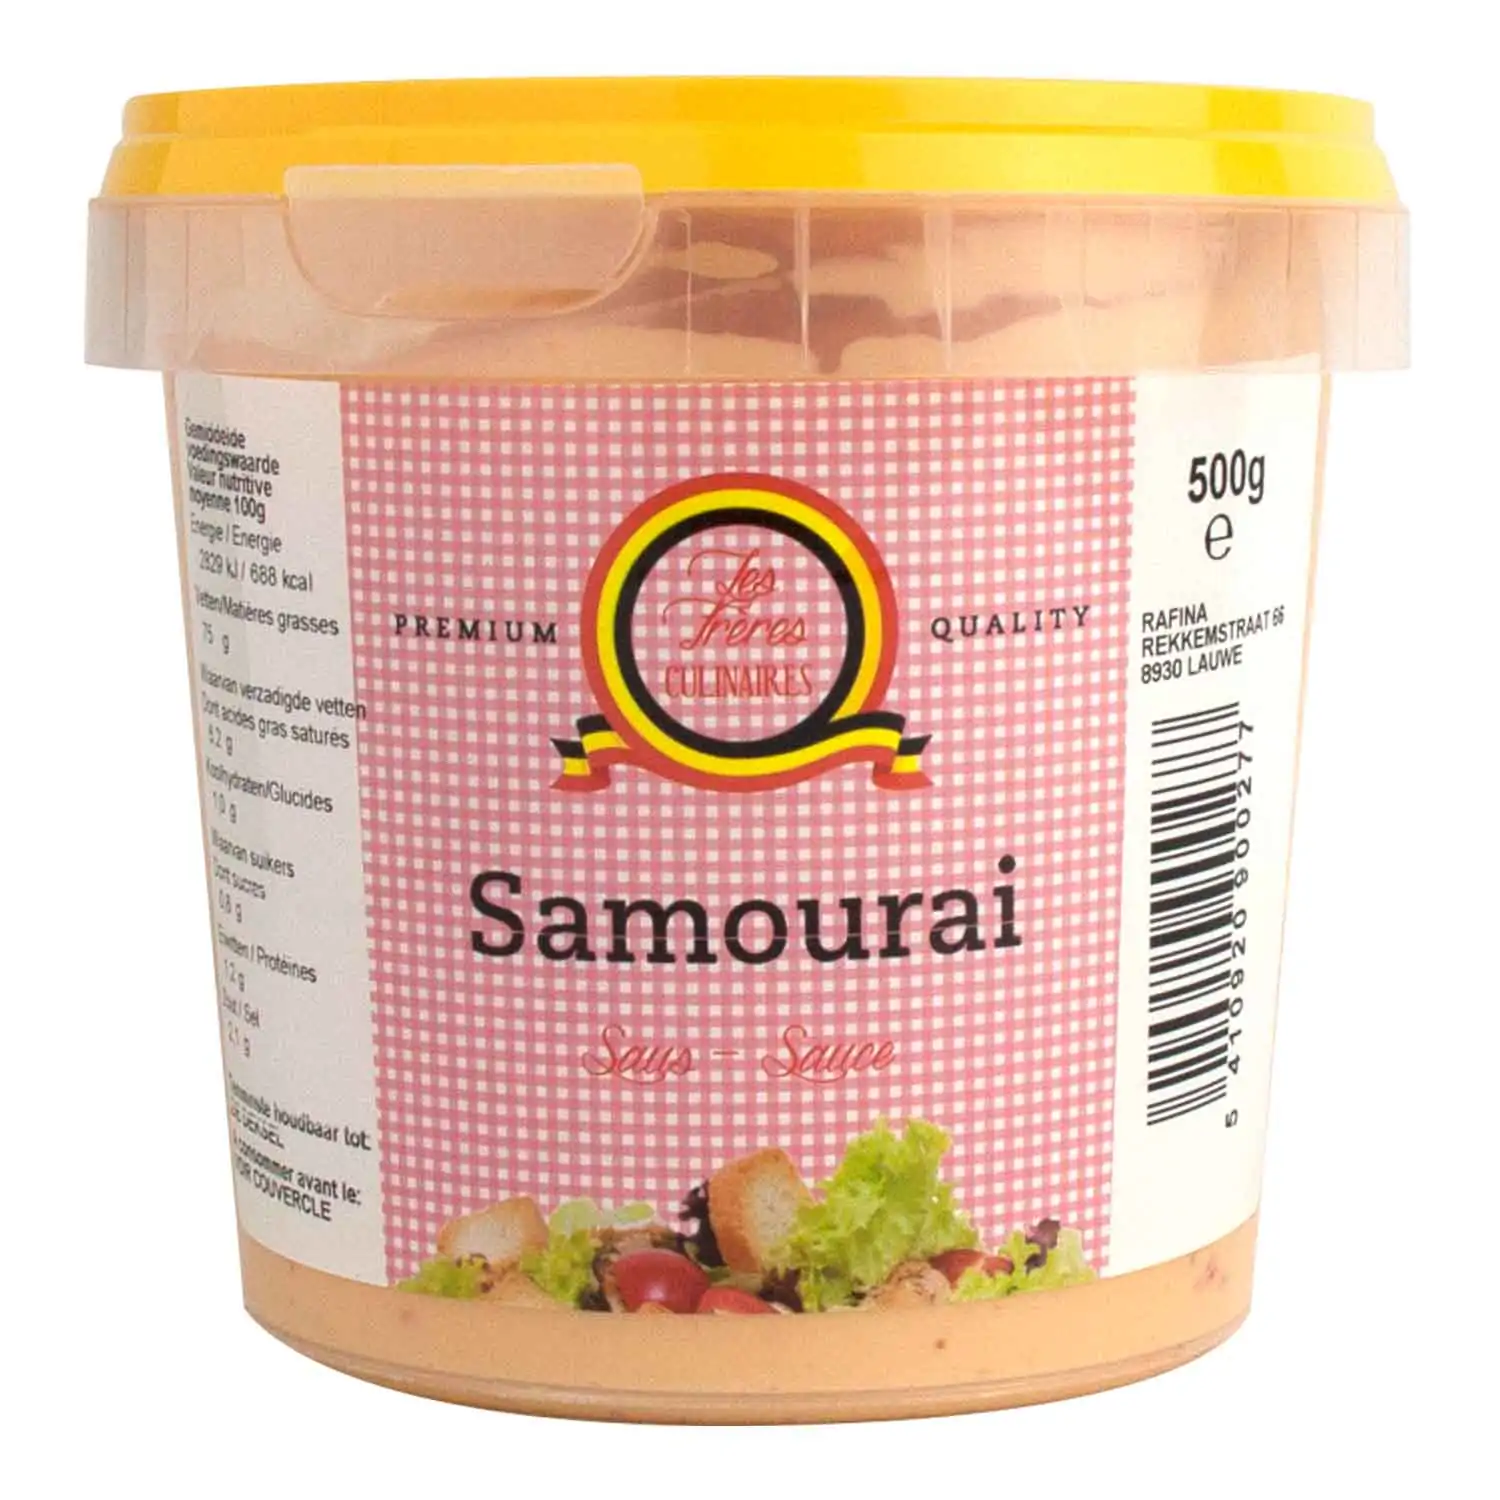 Les Frères Culinaires samourai 500g - Buy at Real Tobacco